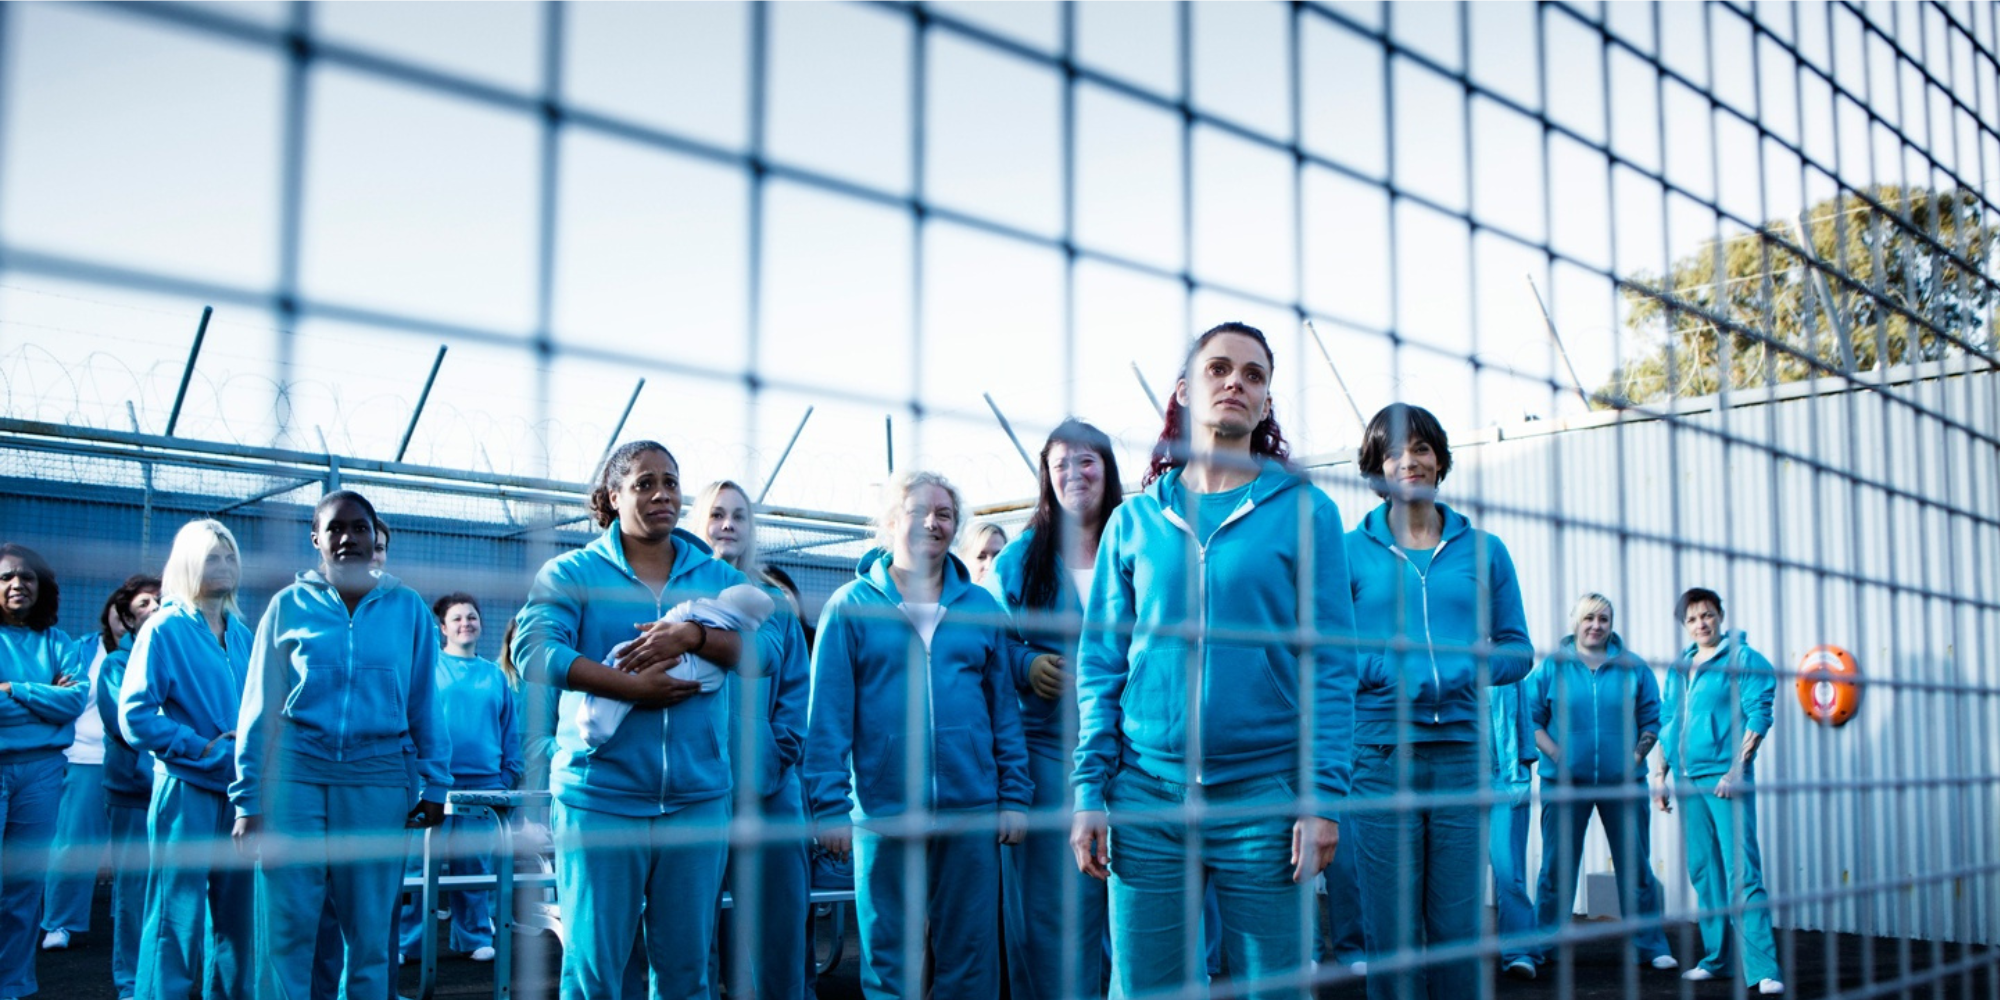 Inmates of 'Wentworth' standing behind a gate